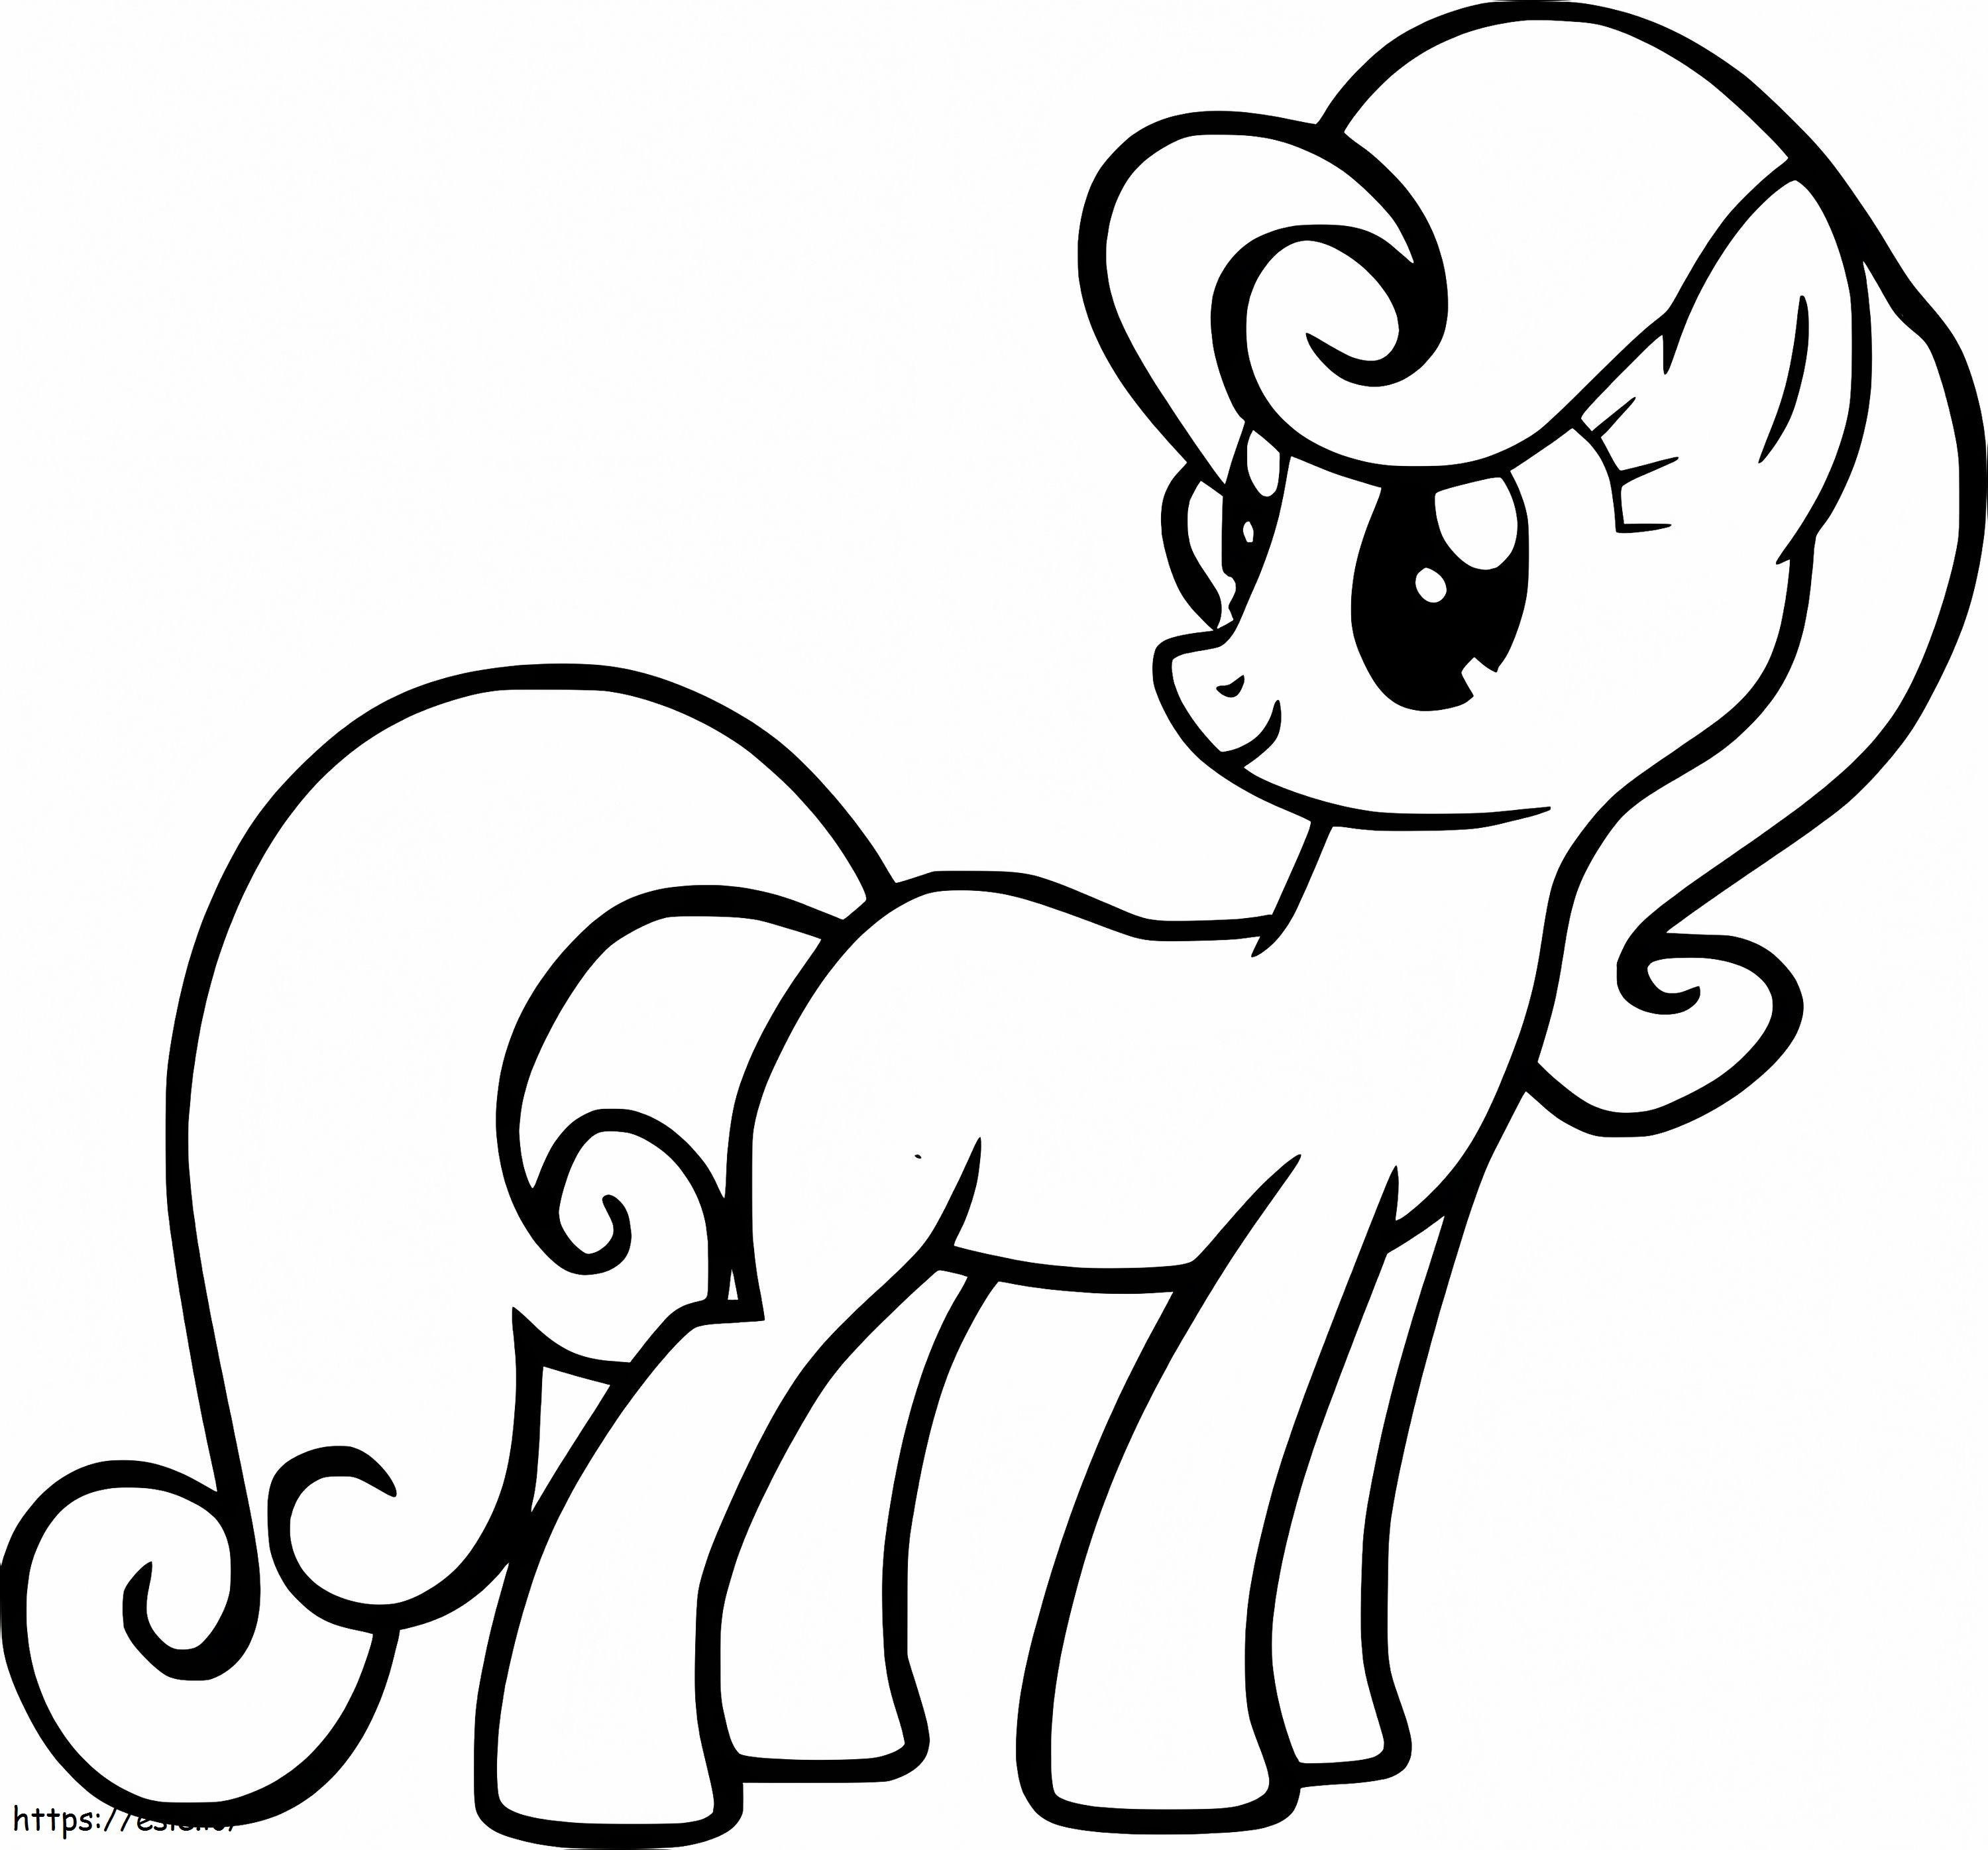 Bon Bon From My Little Pony coloring page